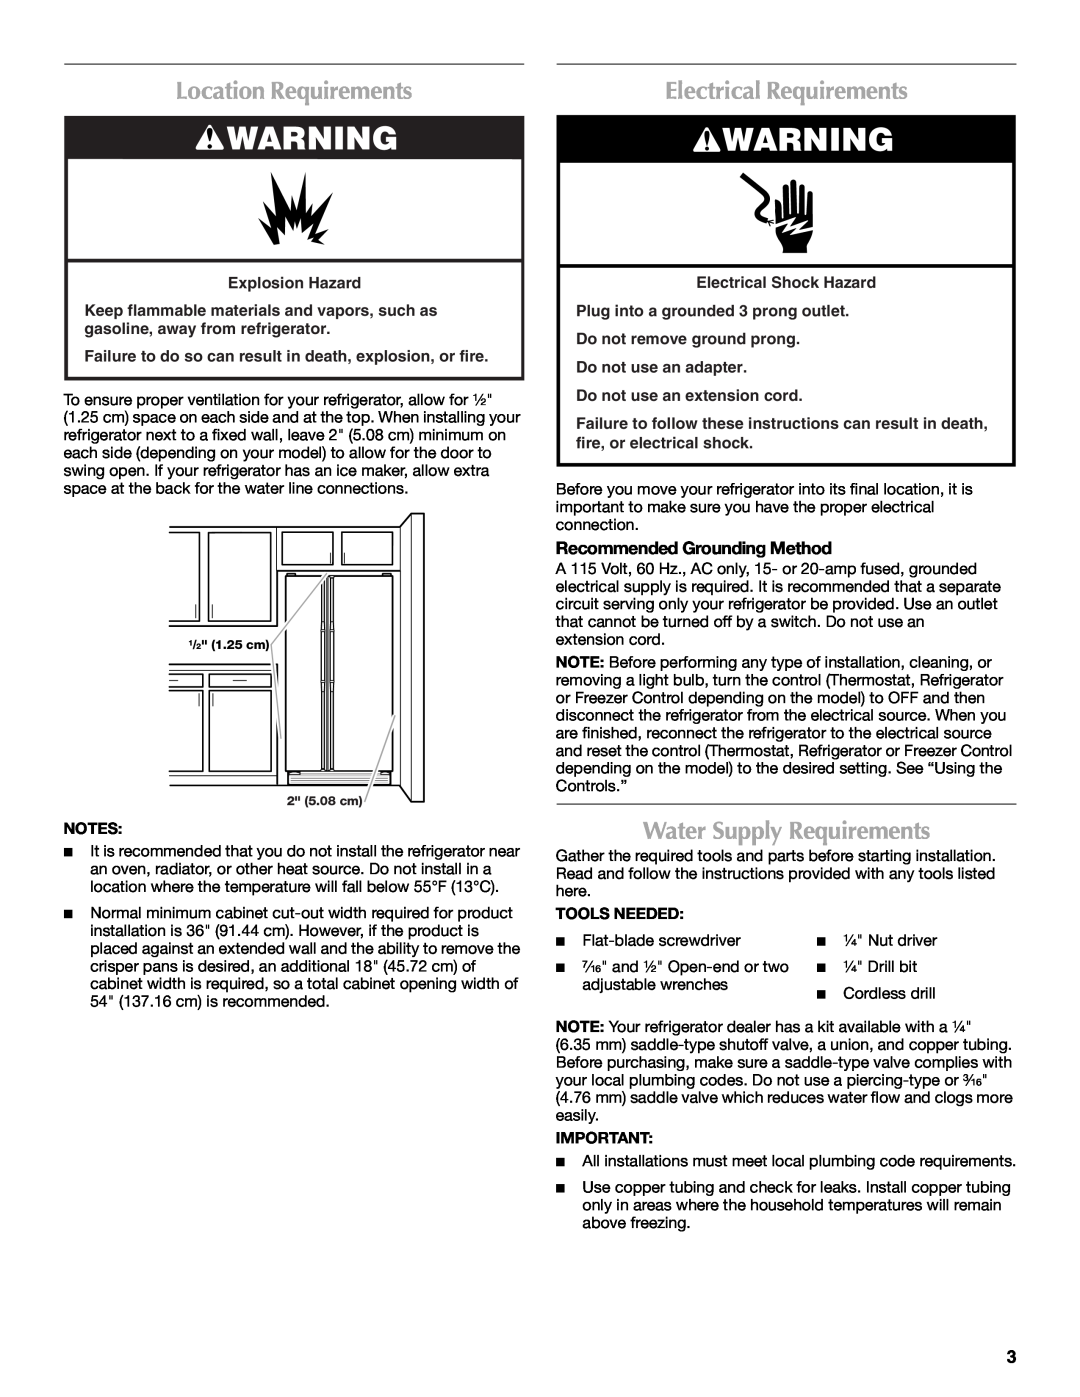 Maytag W10213164A Location Requirements, Electrical Requirements, Water Supply Requirements, Recommended Grounding Method 